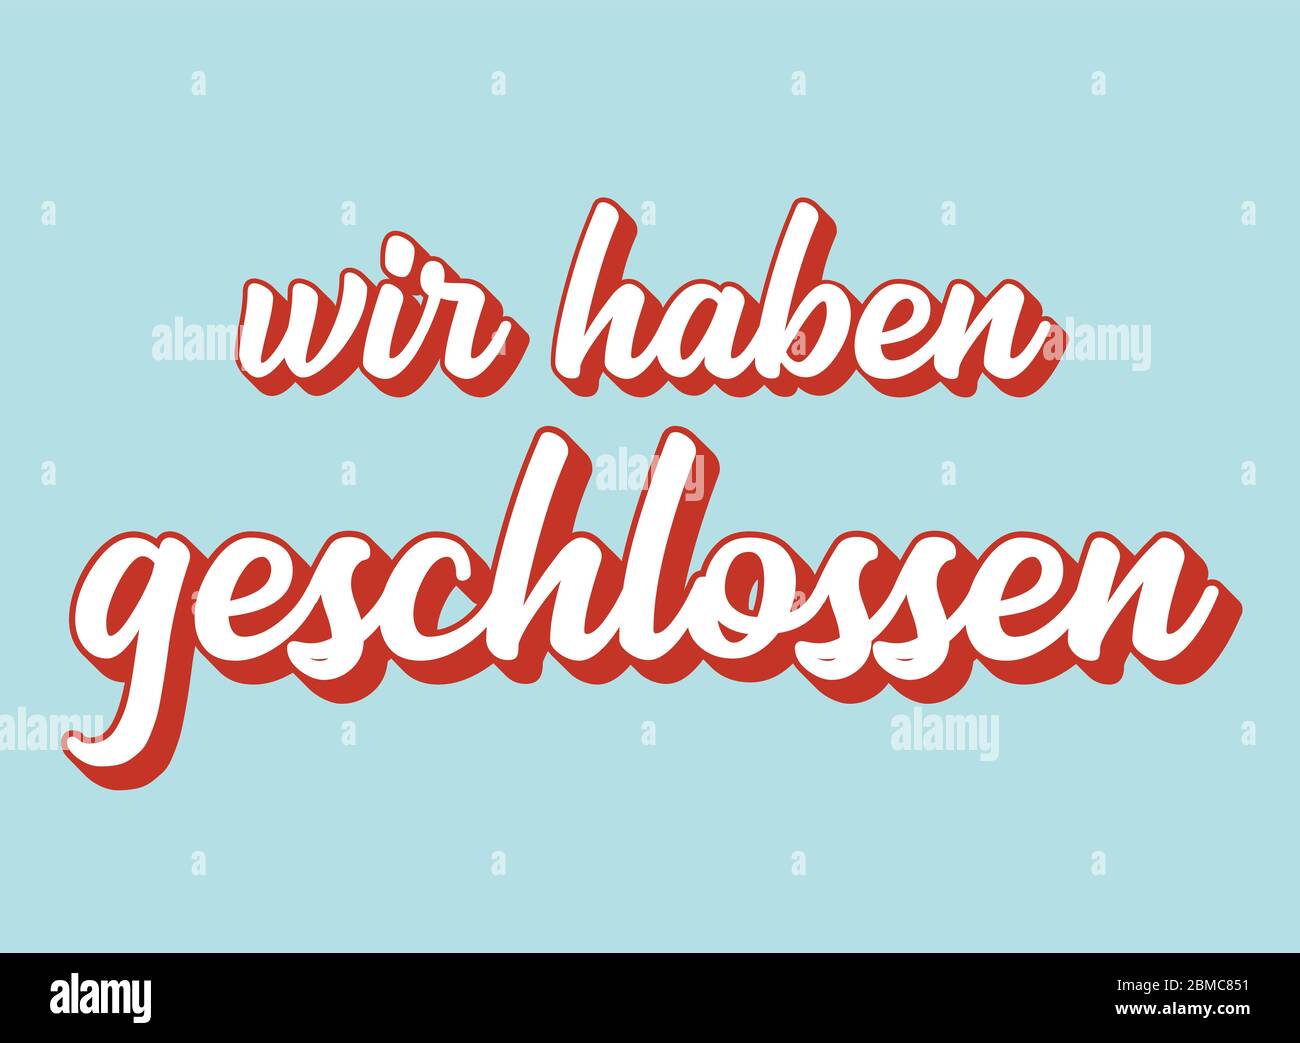 Hand sketched Wir haben geschlossen quote in German. Translated We are closed'. Lettering for advertisement, announcement. Stock Vector